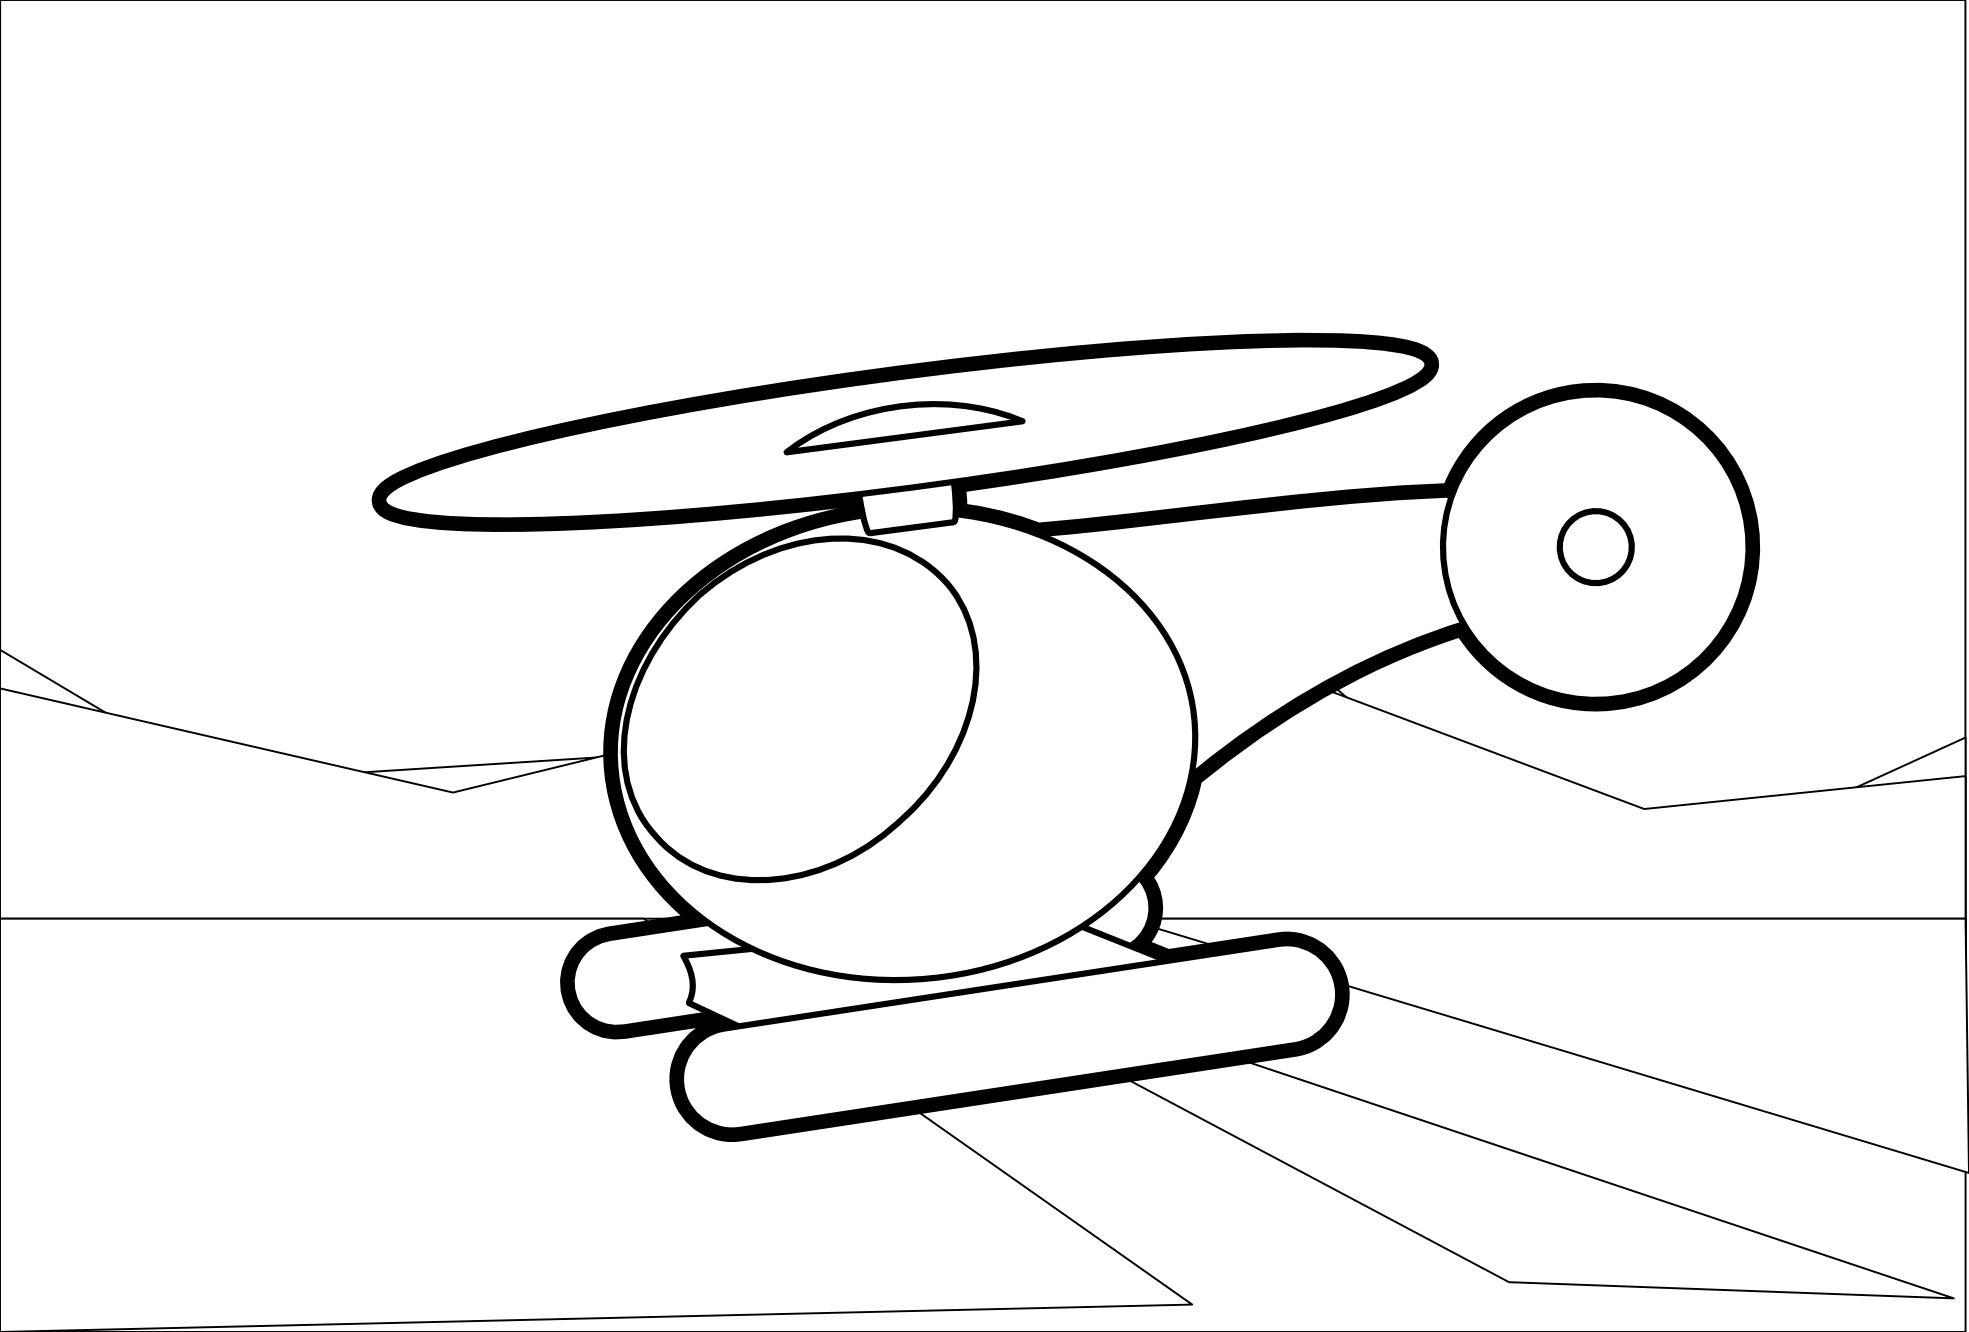 Helicopter Clipart Black And White   Clipart Panda   Free Clipart